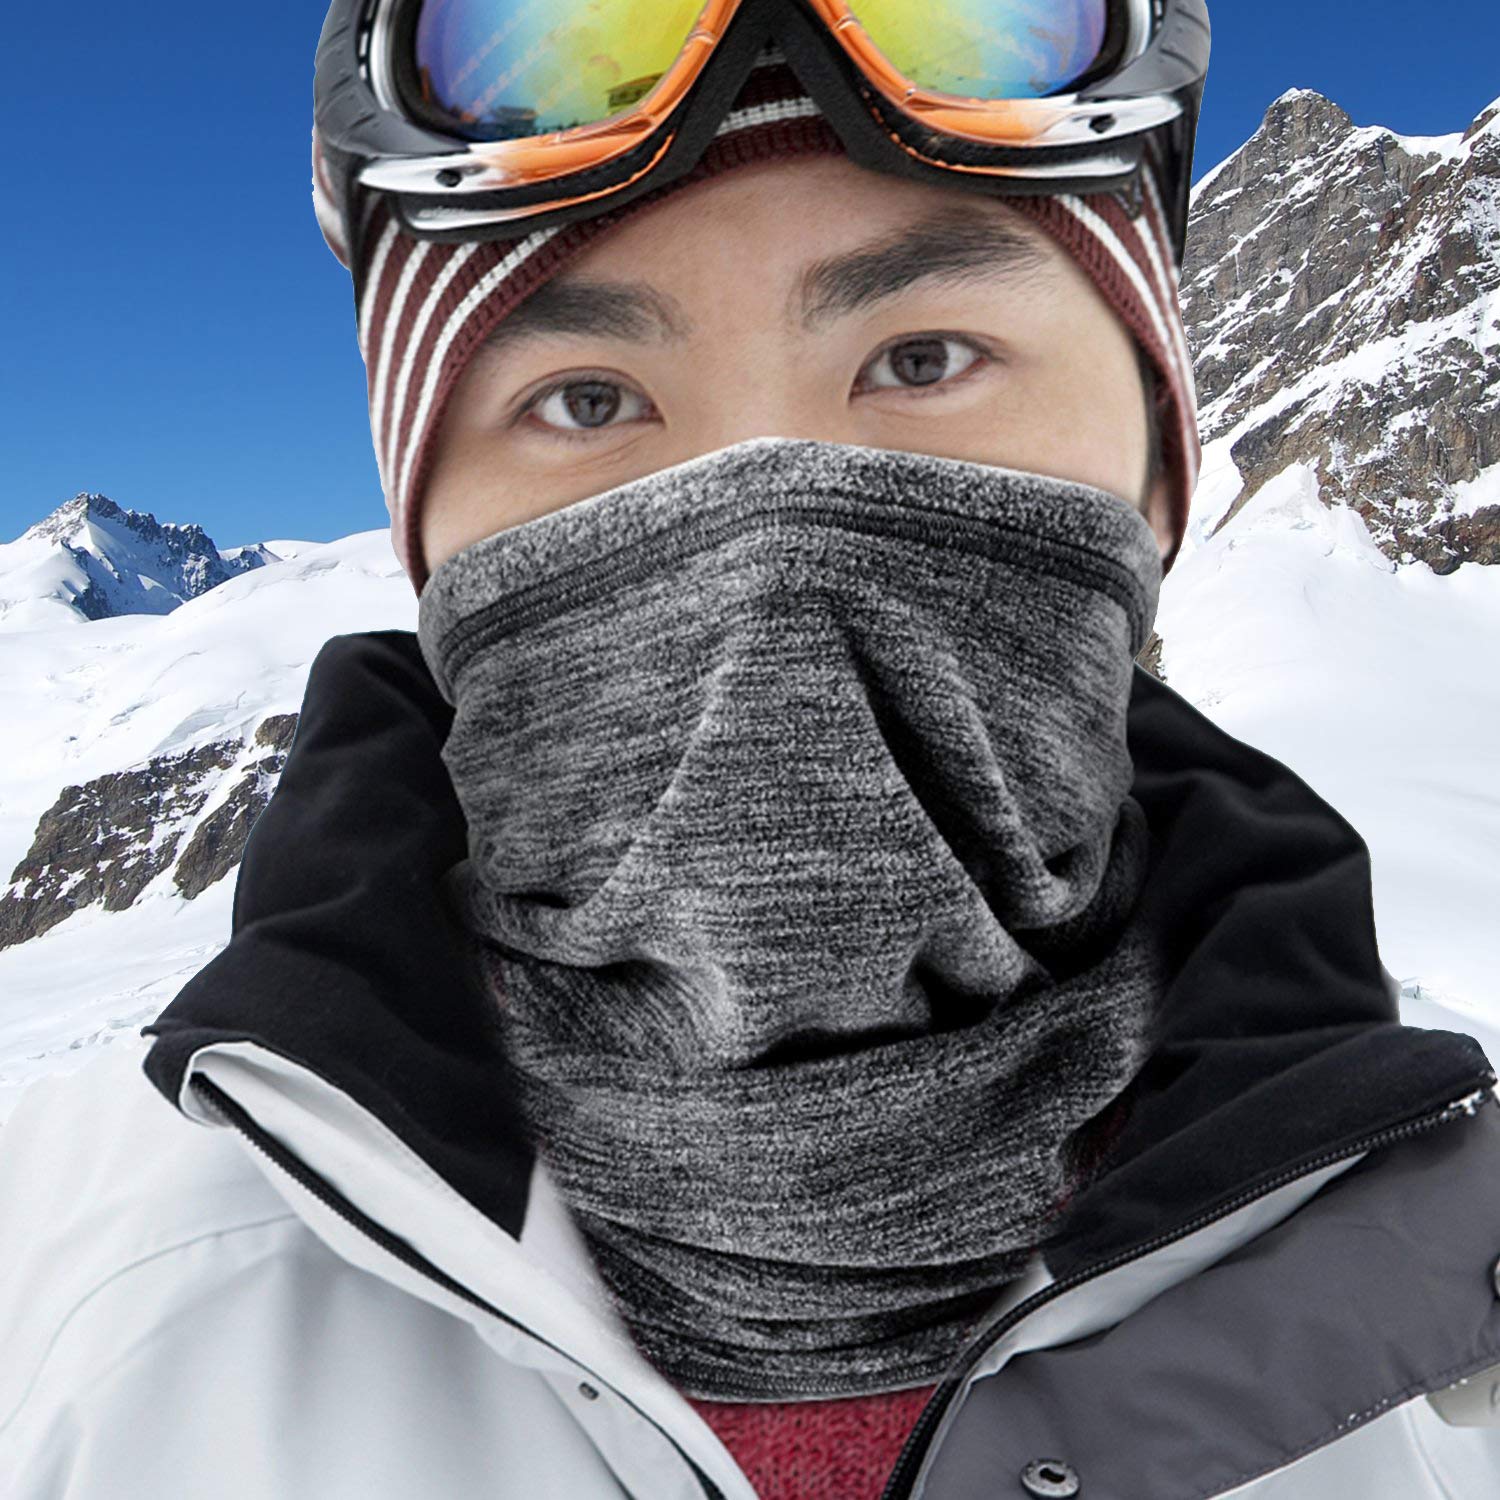 wtactful Soft Fleece Neck Gaiter Warmer Face Mask for Cold Weather Winter Outdoor Sports